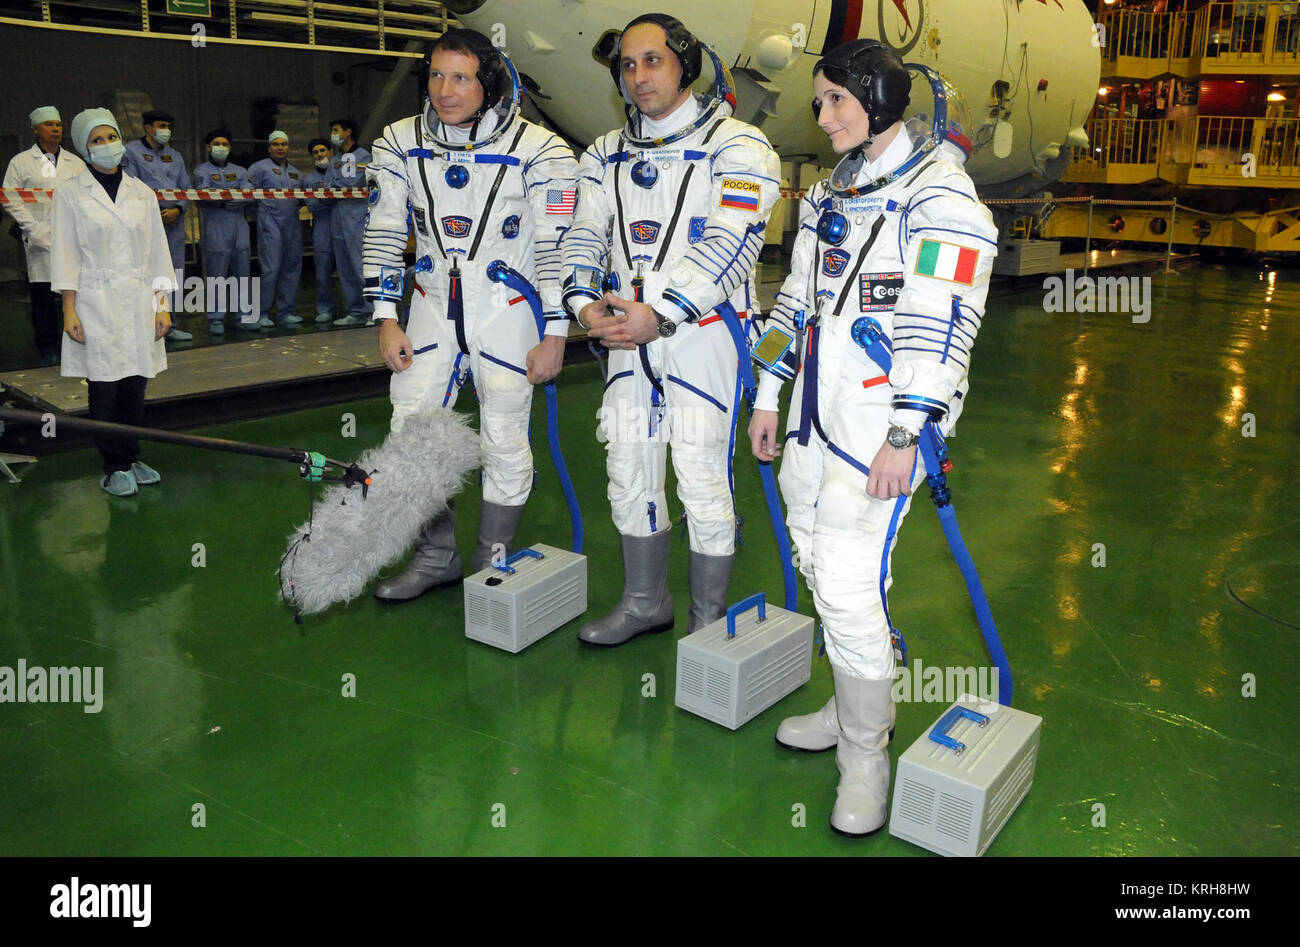 5473:  In the Integration Facility at the Baikonur Cosmodrome in Kazakhstan, Expedition 42/43 crewmembers Terry Virts of NASA (left), Anton Shkaplerov of the Russian Federal Space Agency (Roscosmos, center) and Samantha Cristoforetti of the European Space Agency (right) listen to reporters’ questions Nov. 12 during a “fit check” dress rehearsal. The trio will launch Nov. 24, Kazakh time, from Baikonur in the Soyuz TMA-15M spacecraft for a 5 ½ month mission on the International Space Station.  NASA/Victor Ivanov Soyuz TMA-15M crew during the 'fit check' Stock Photo